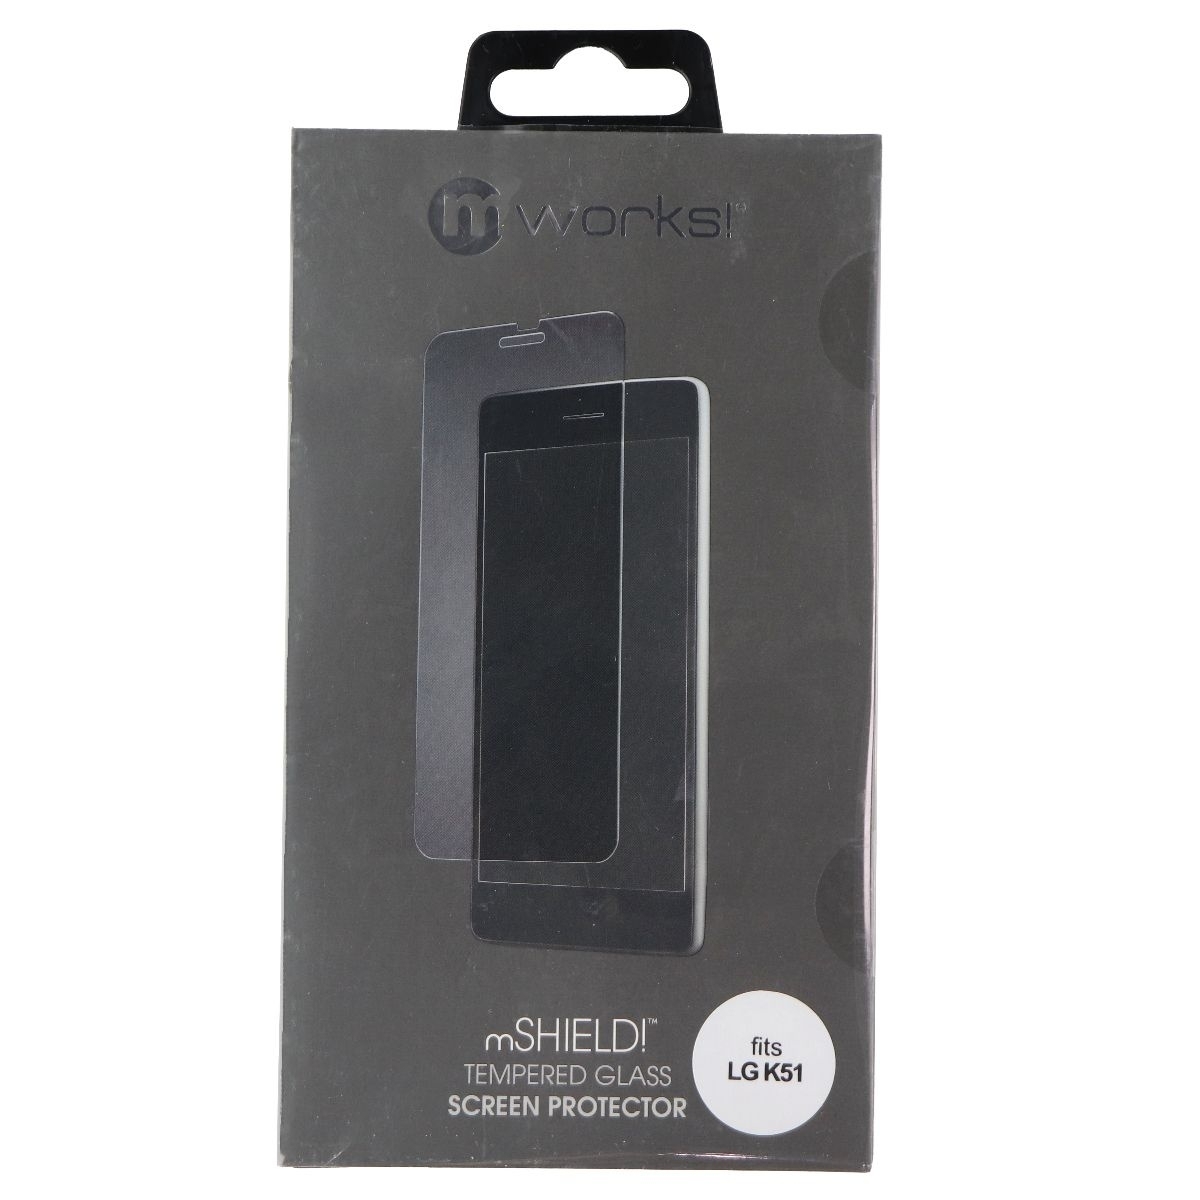 MWorks! MSHIELD! Tempered Glass Screen Protector For LG K51 - Clear